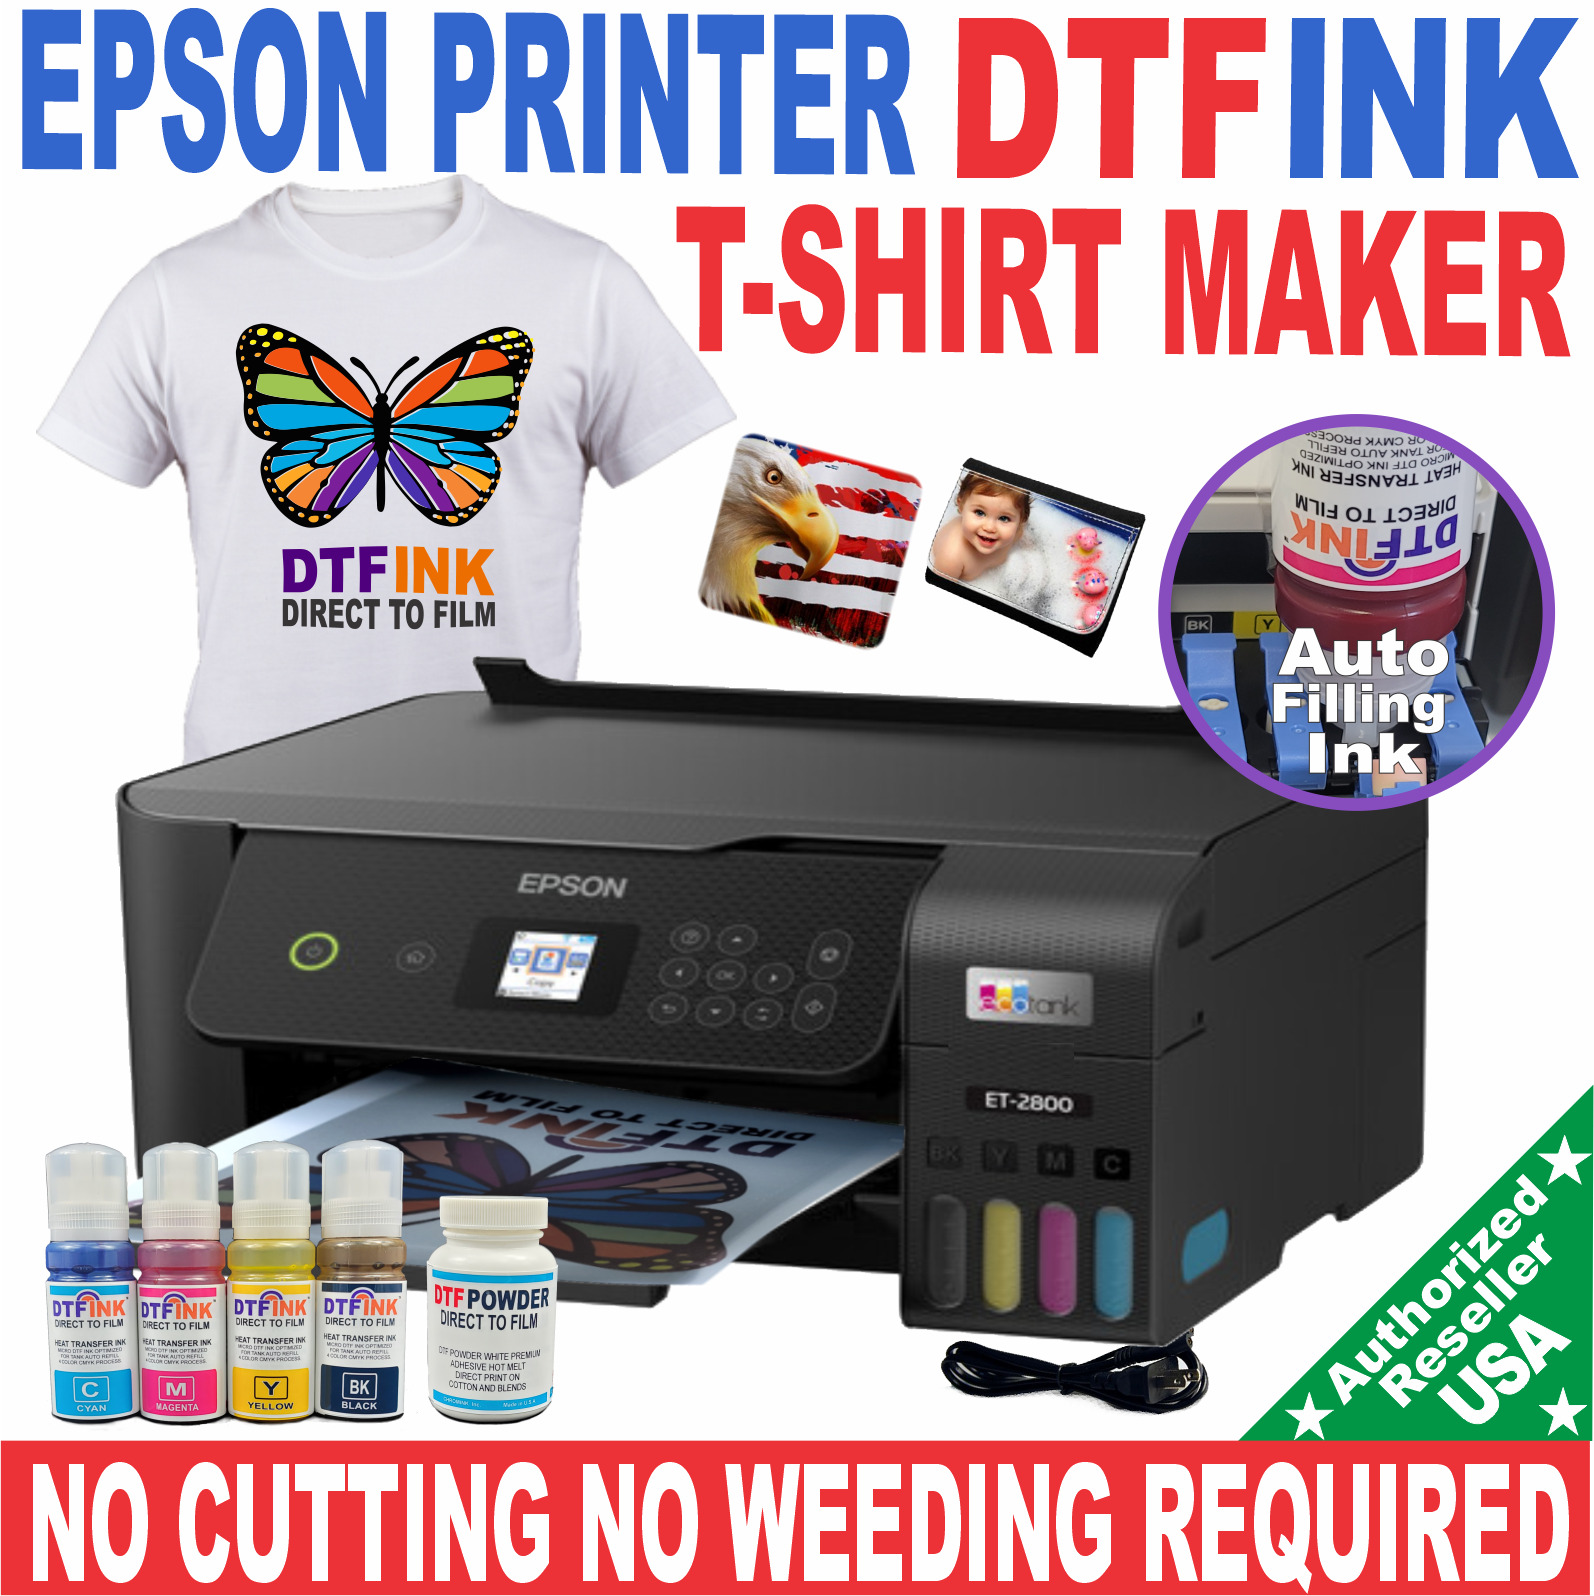 EPSON PRINTER WITH DTF DIRECT INK HEAT TRANSFER T-SHIRT PRINT NO CUT START KIT.